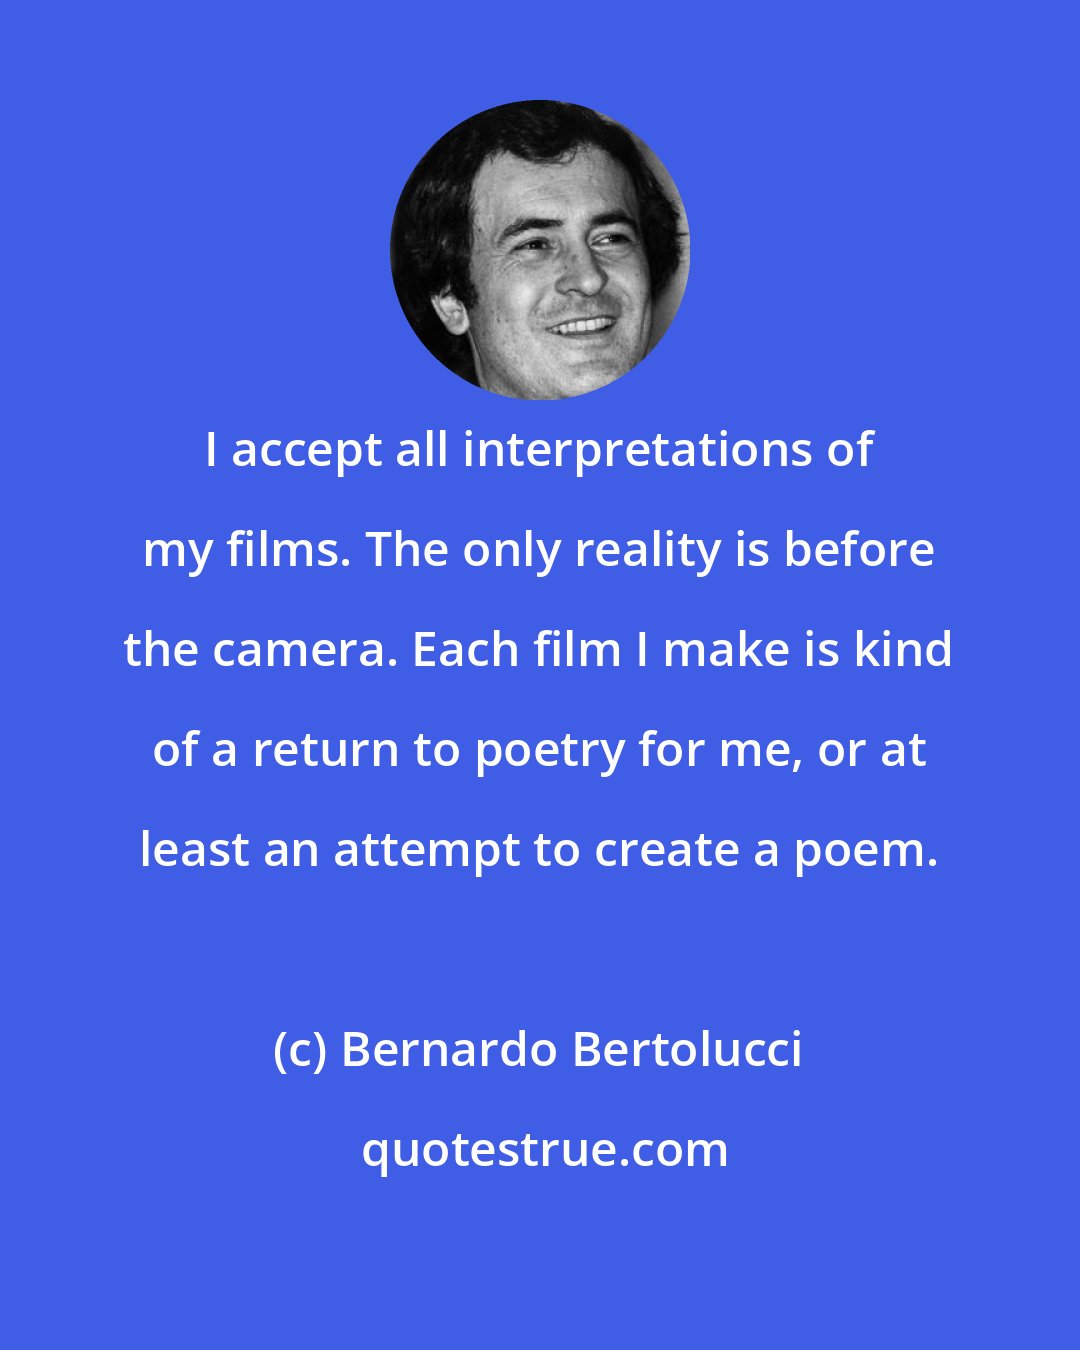 Bernardo Bertolucci: I accept all interpretations of my films. The only reality is before the camera. Each film I make is kind of a return to poetry for me, or at least an attempt to create a poem.